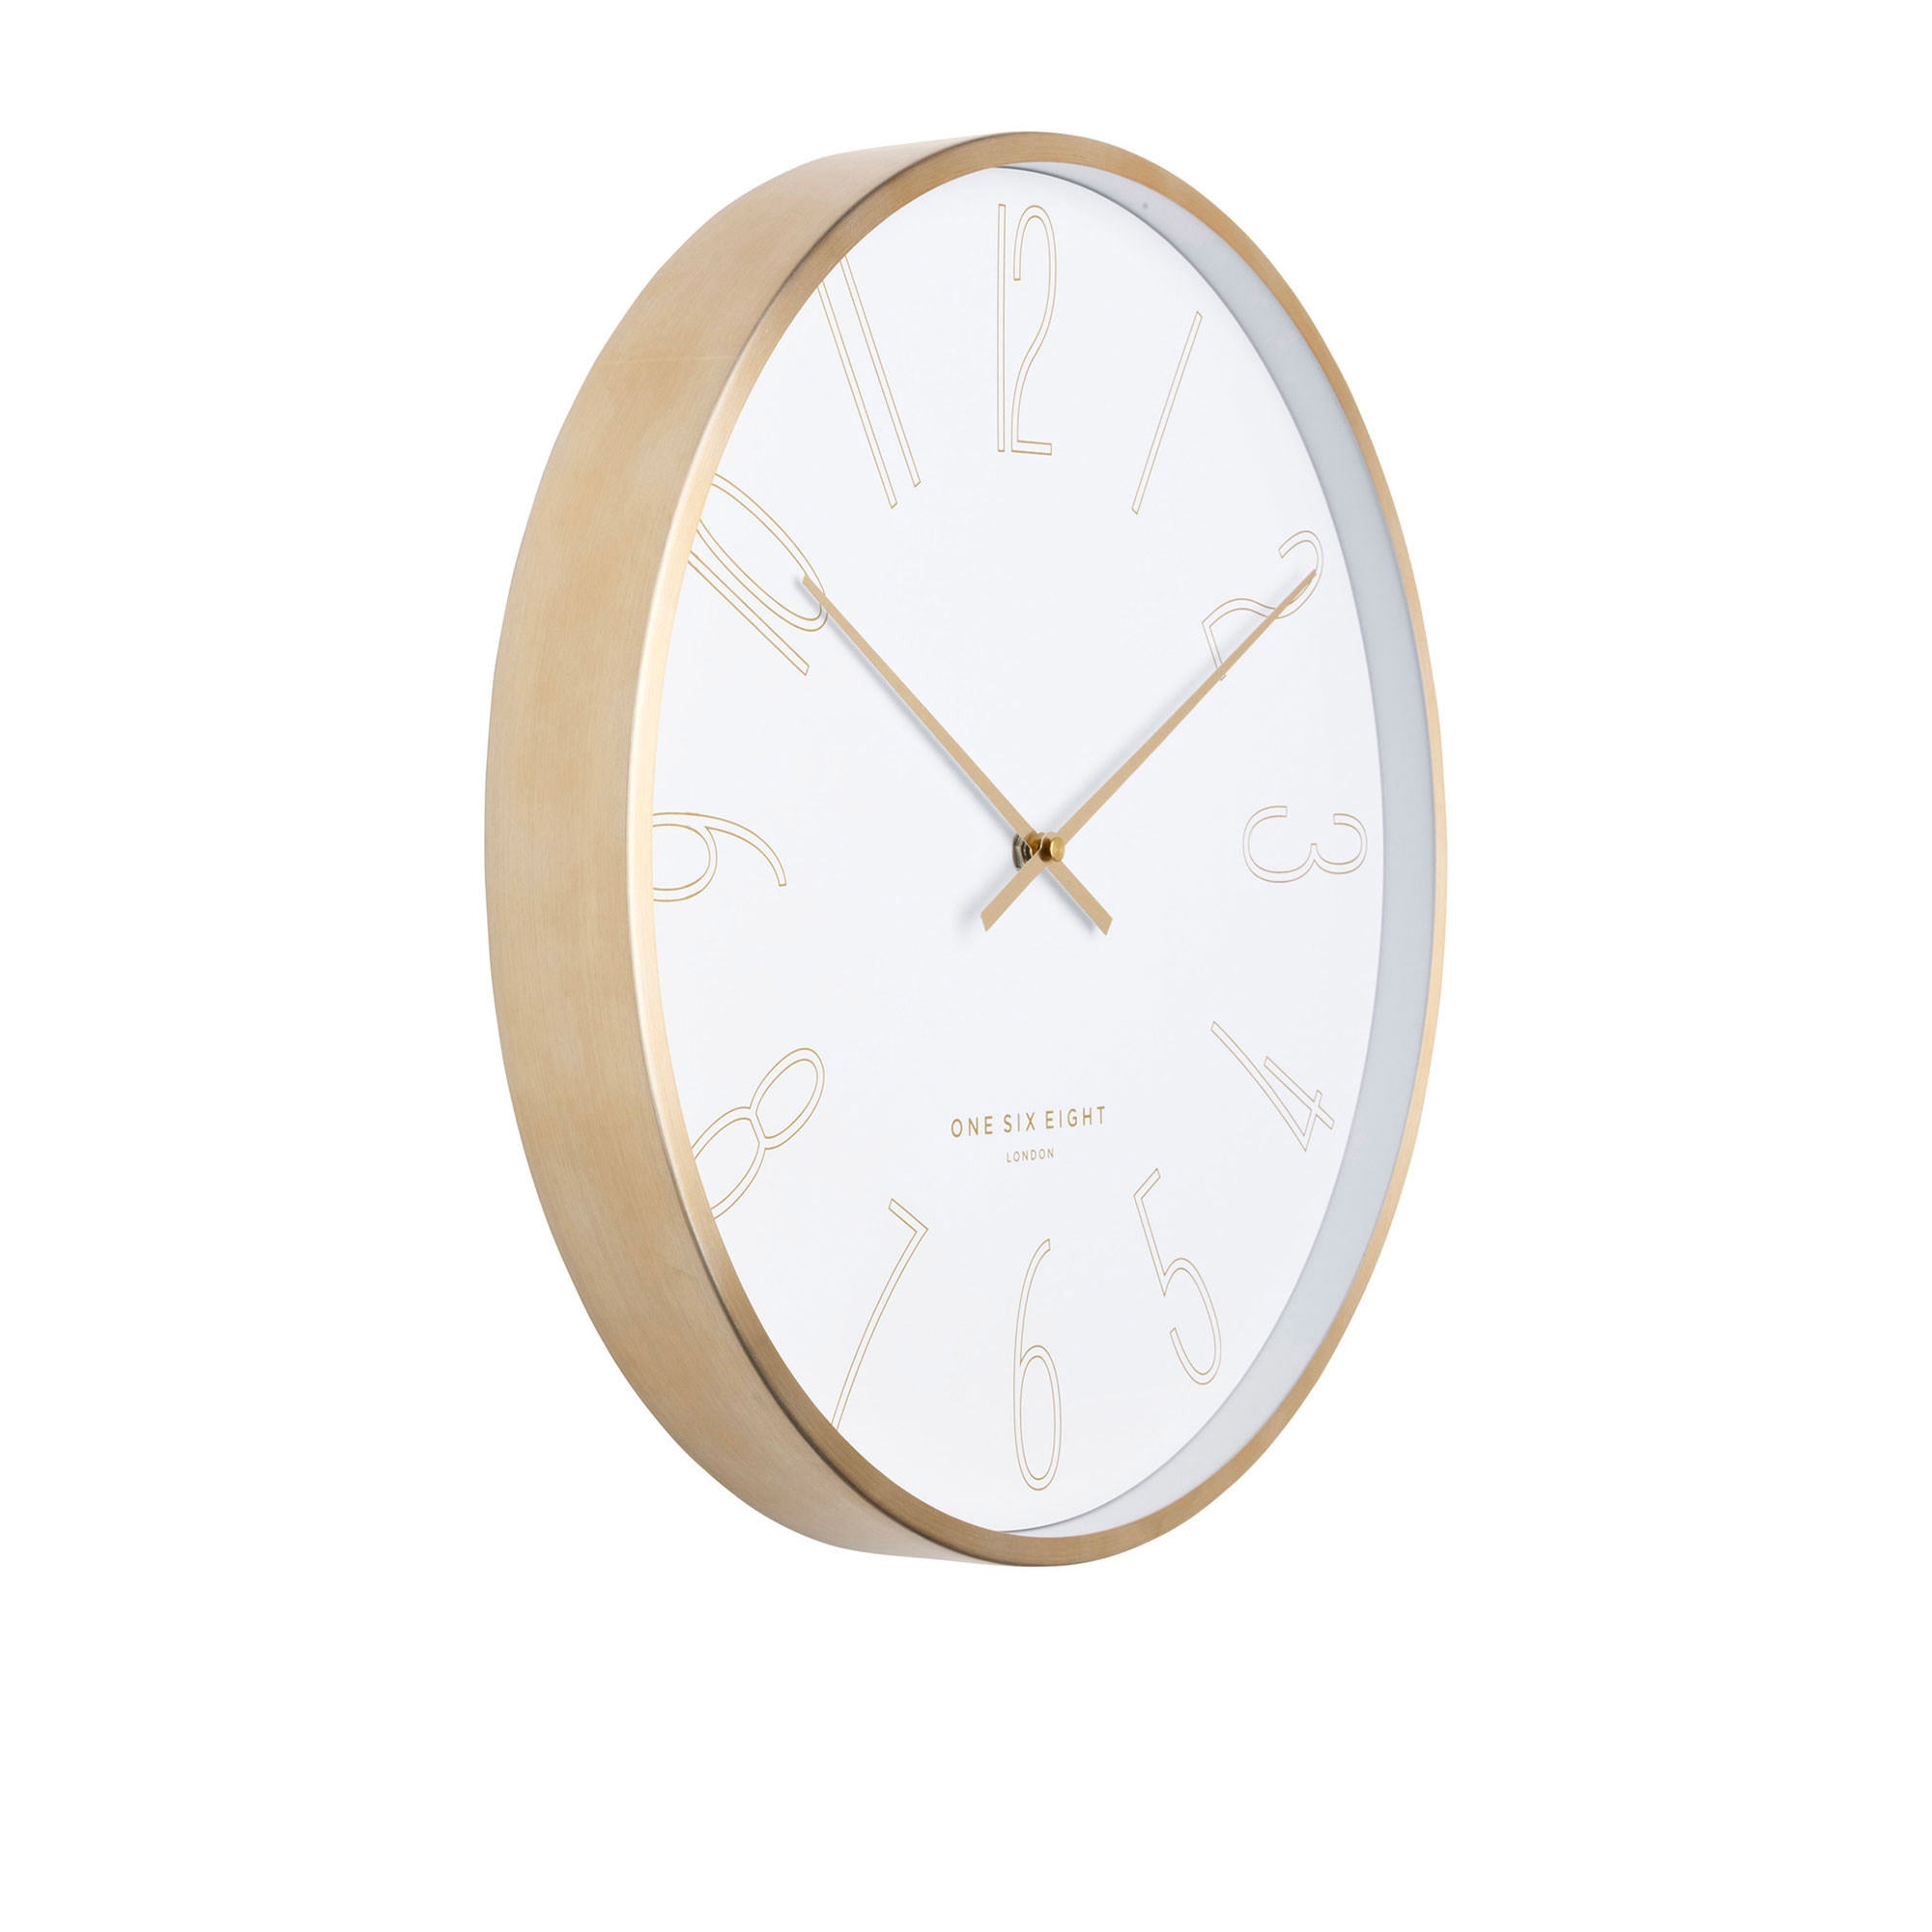 One Six Eight London Astrid Silent Wall Clock 40cm White Image 2